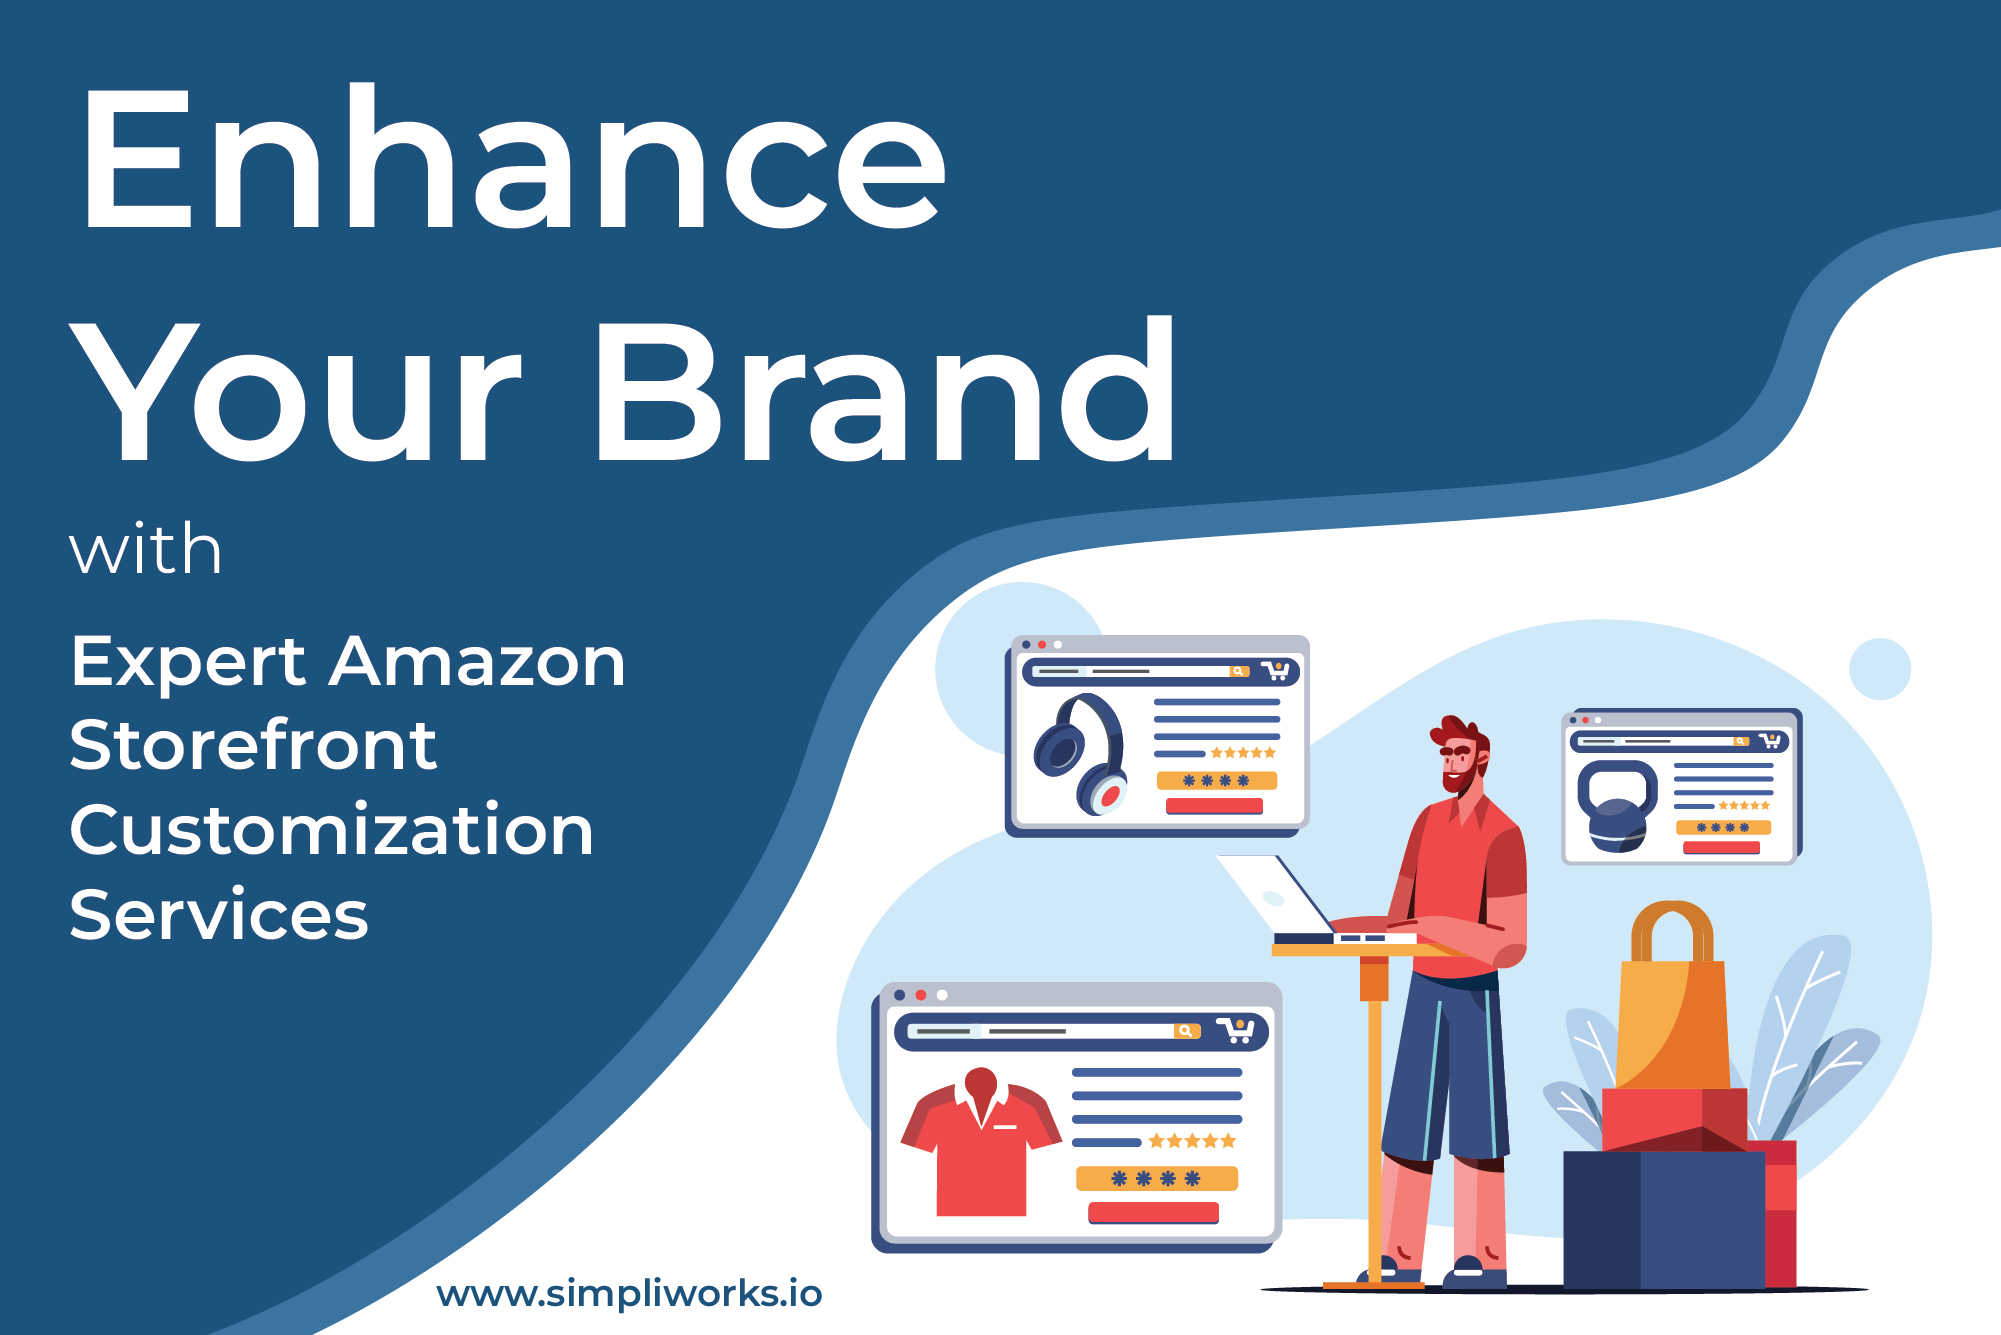 Enhance Your Brand with Expert Amazon Storefront Customization Services